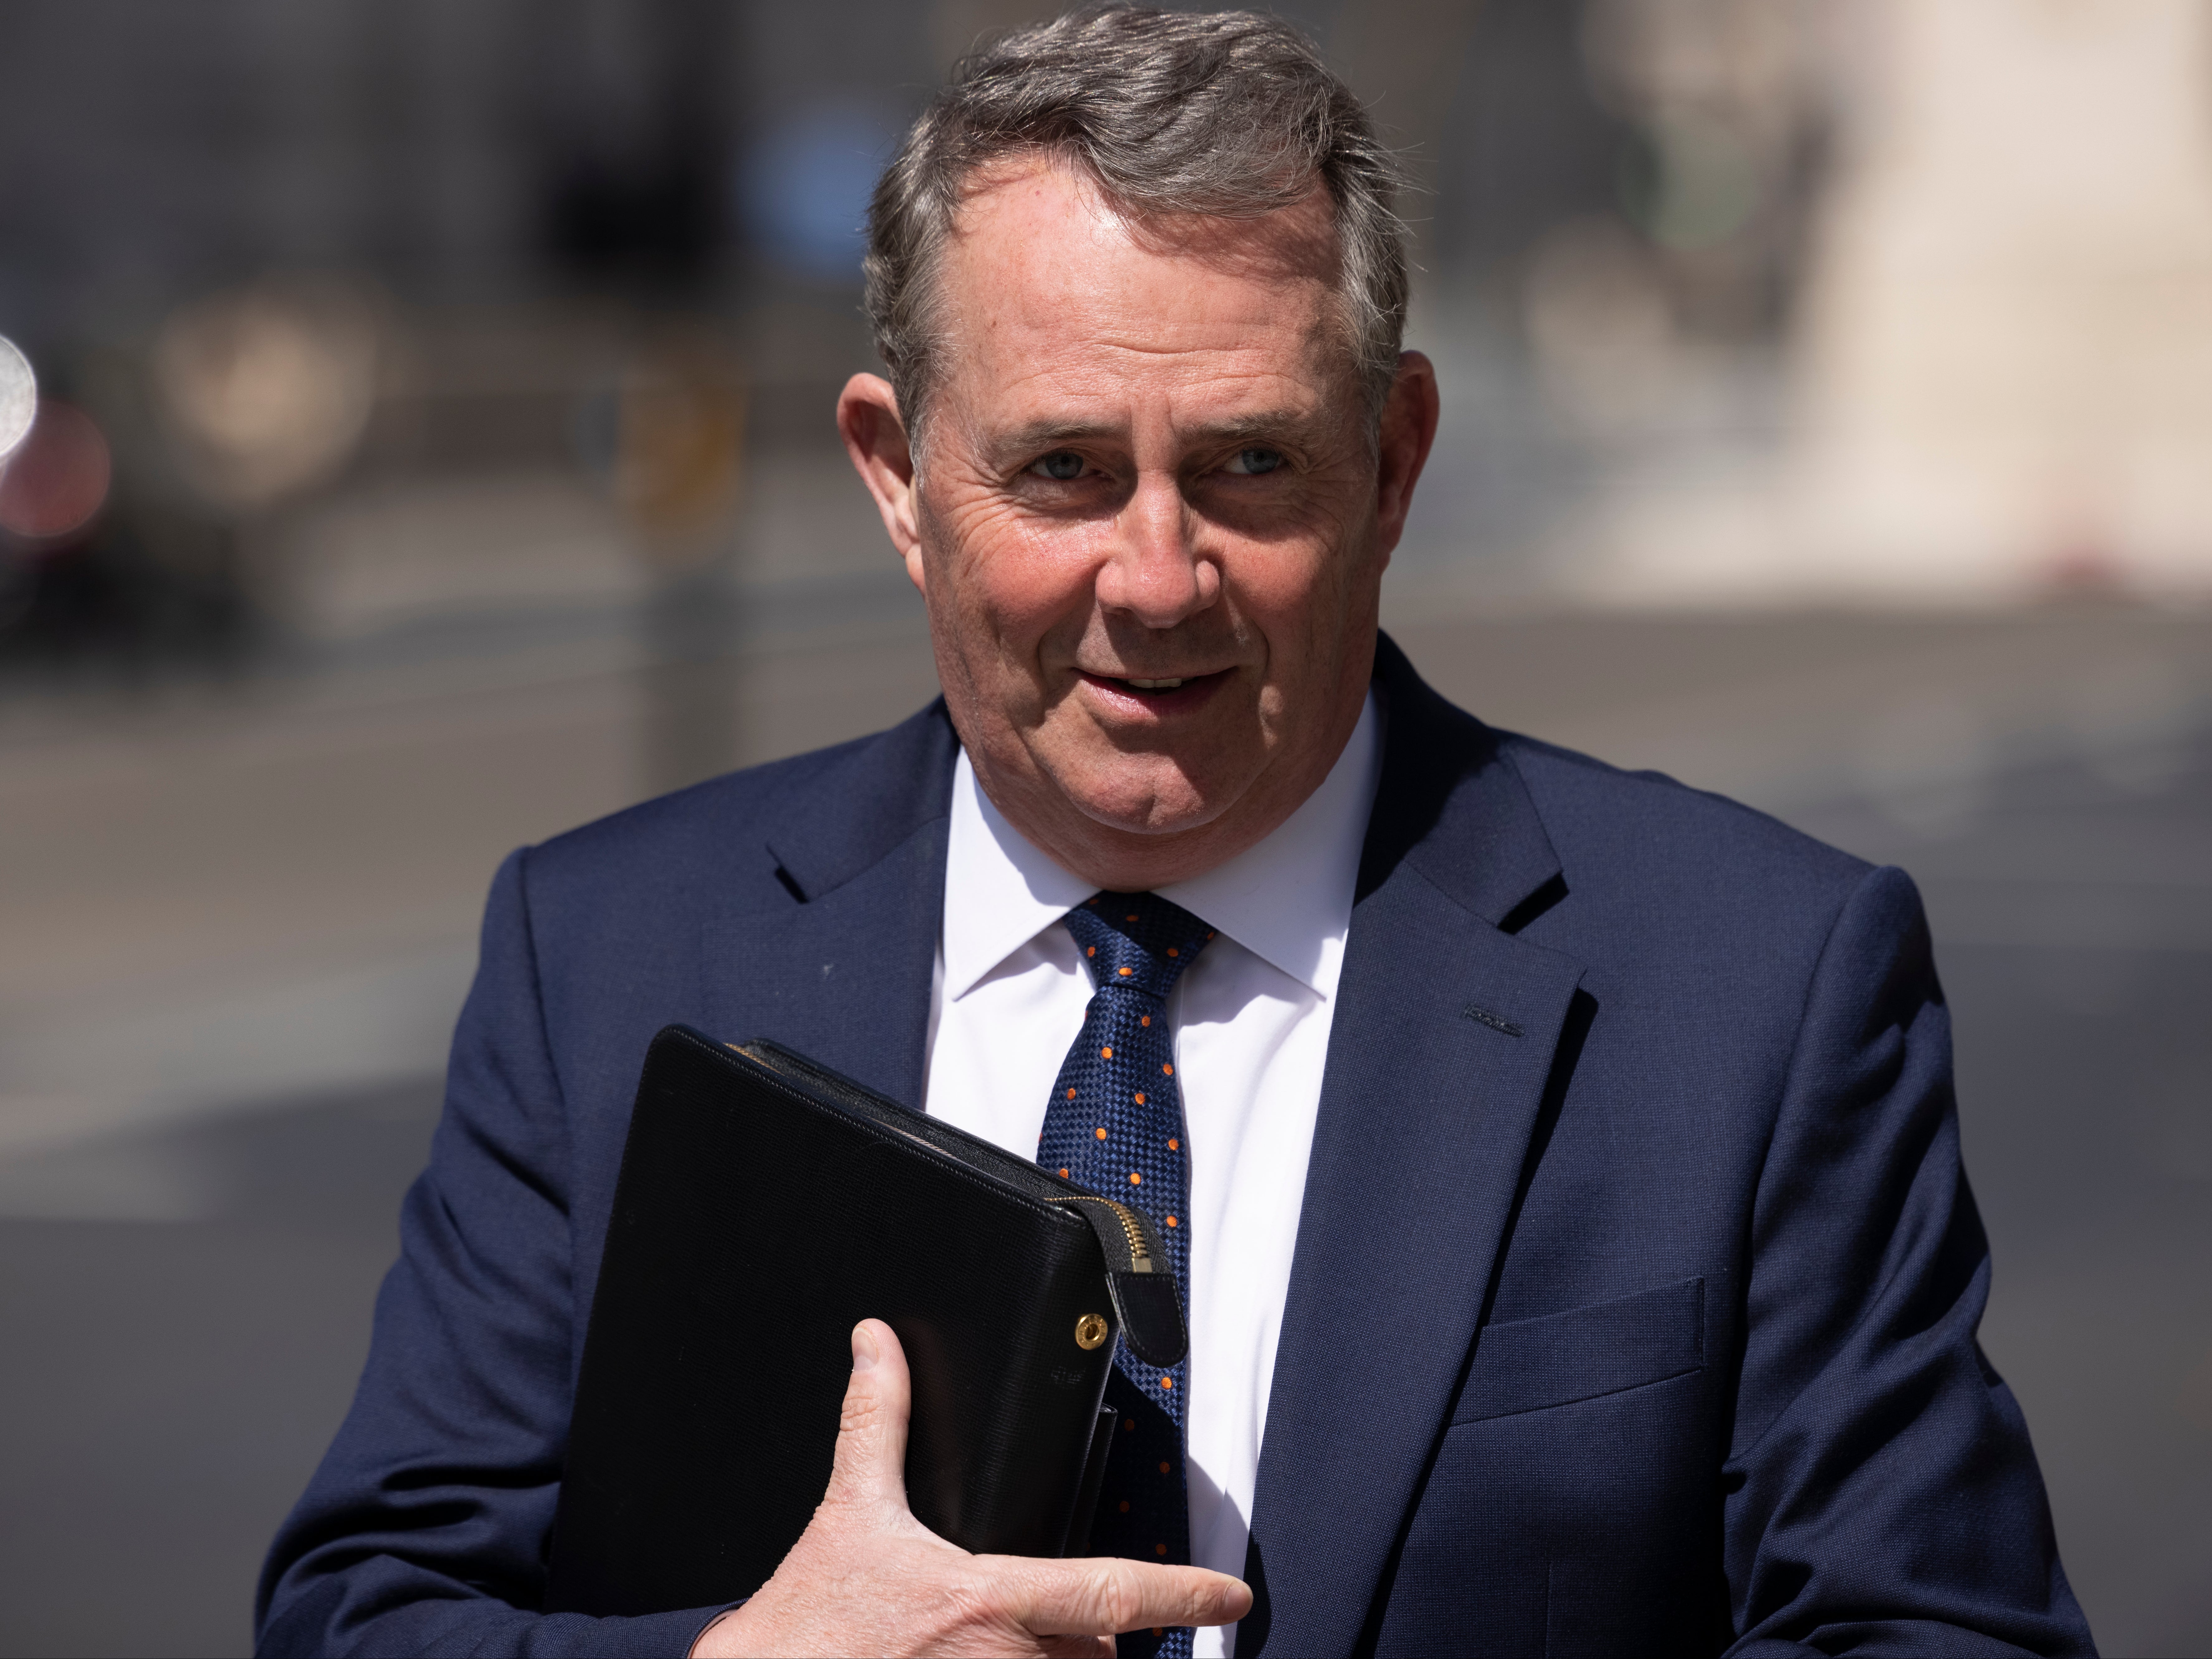 ‘Free trade does not mean a free-for-all,’ says Liam Fox